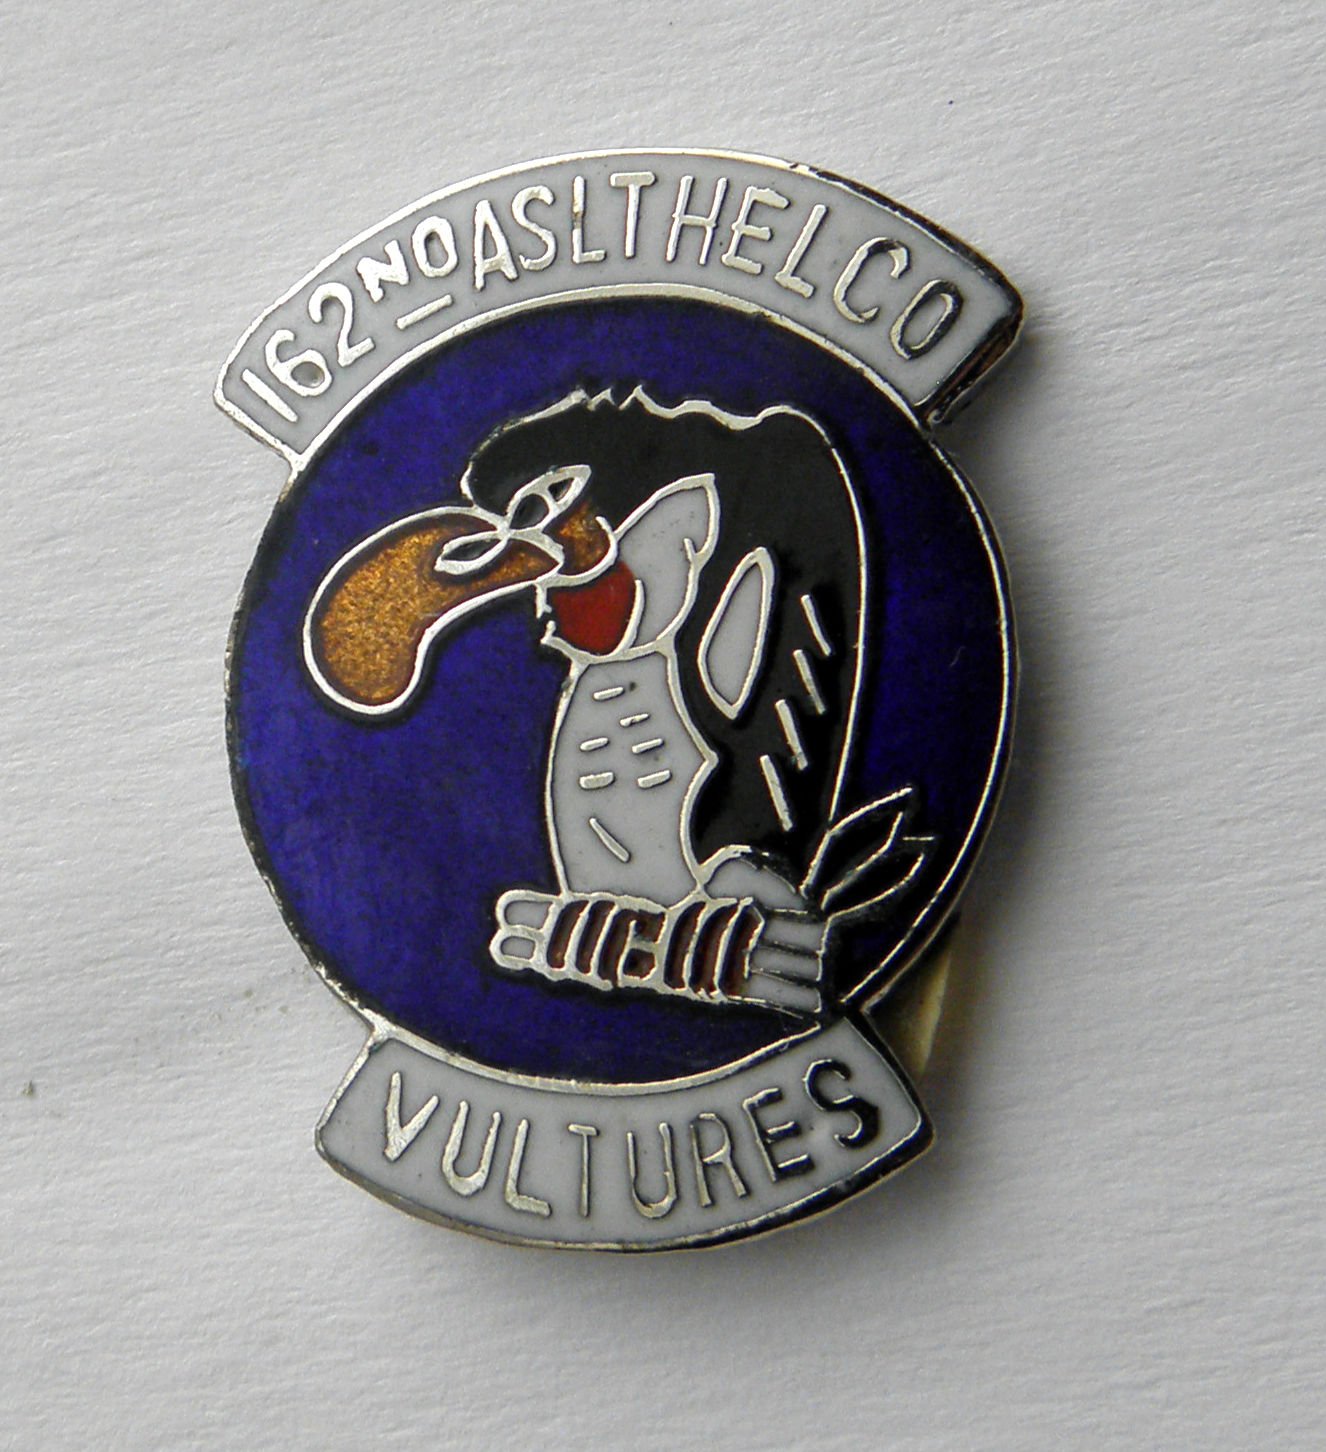 Vultures 162nd Air Assault Helicopter Company Us Army Ahc Lapel Pin